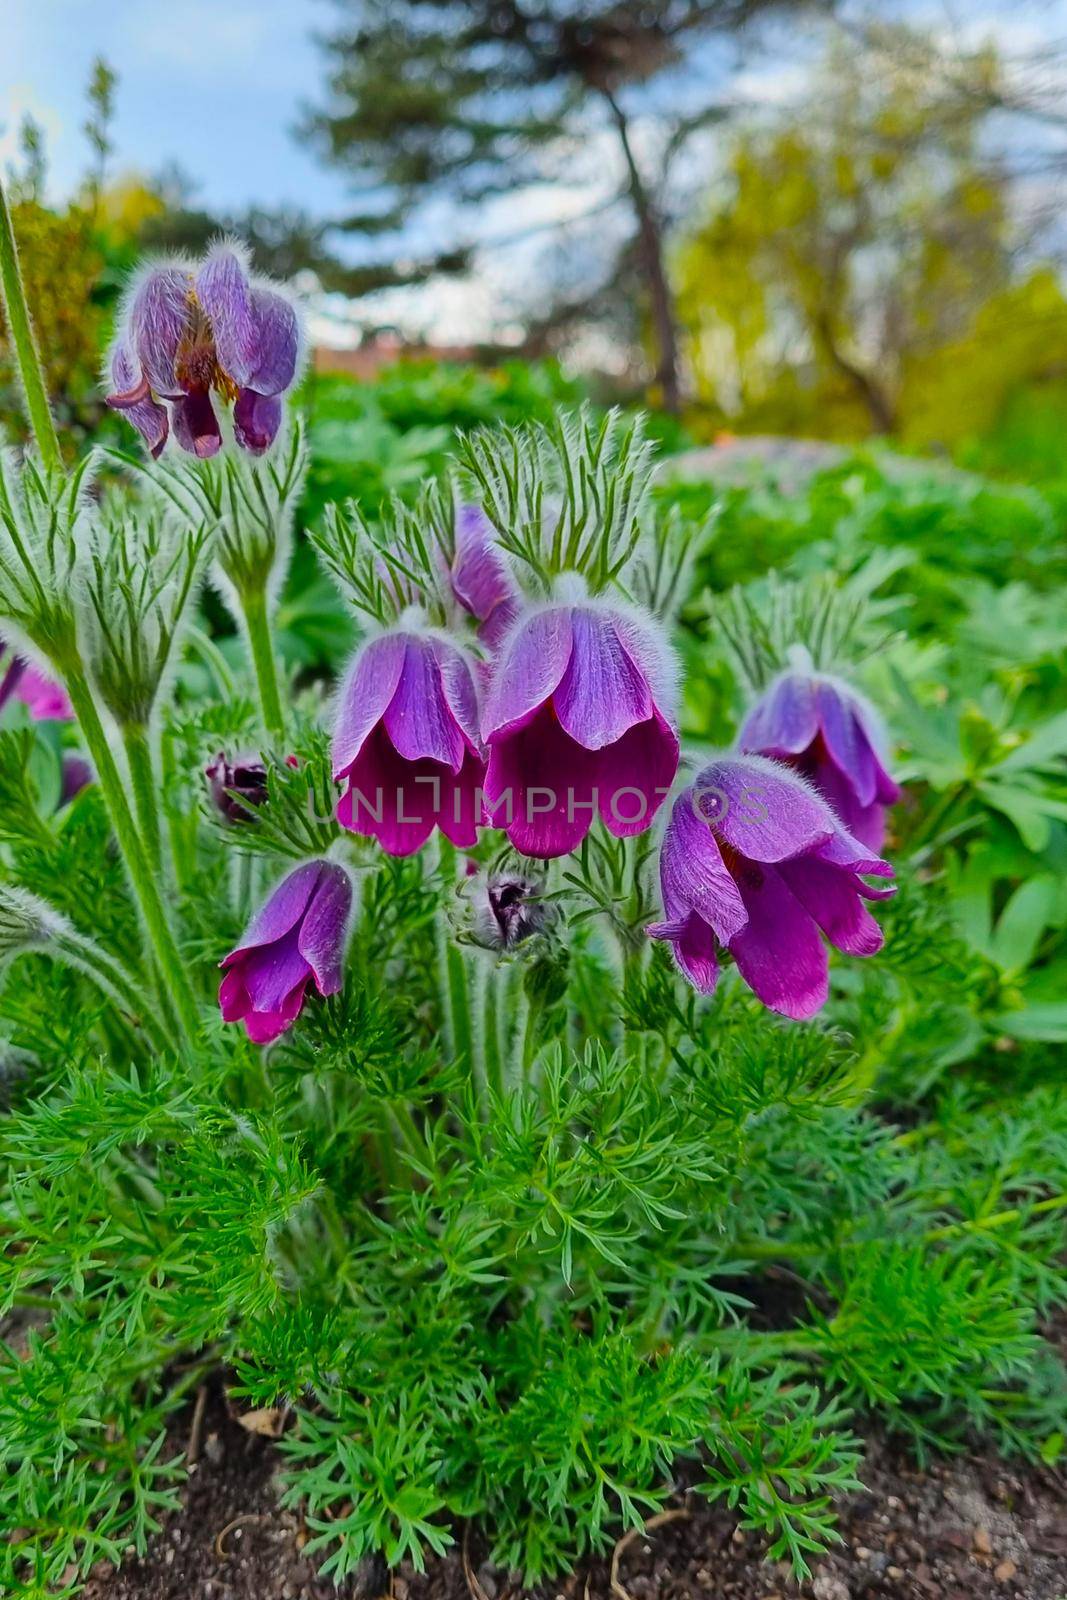 Pulsatilla patens is a species of flowering plant in the family Ranunculaceae